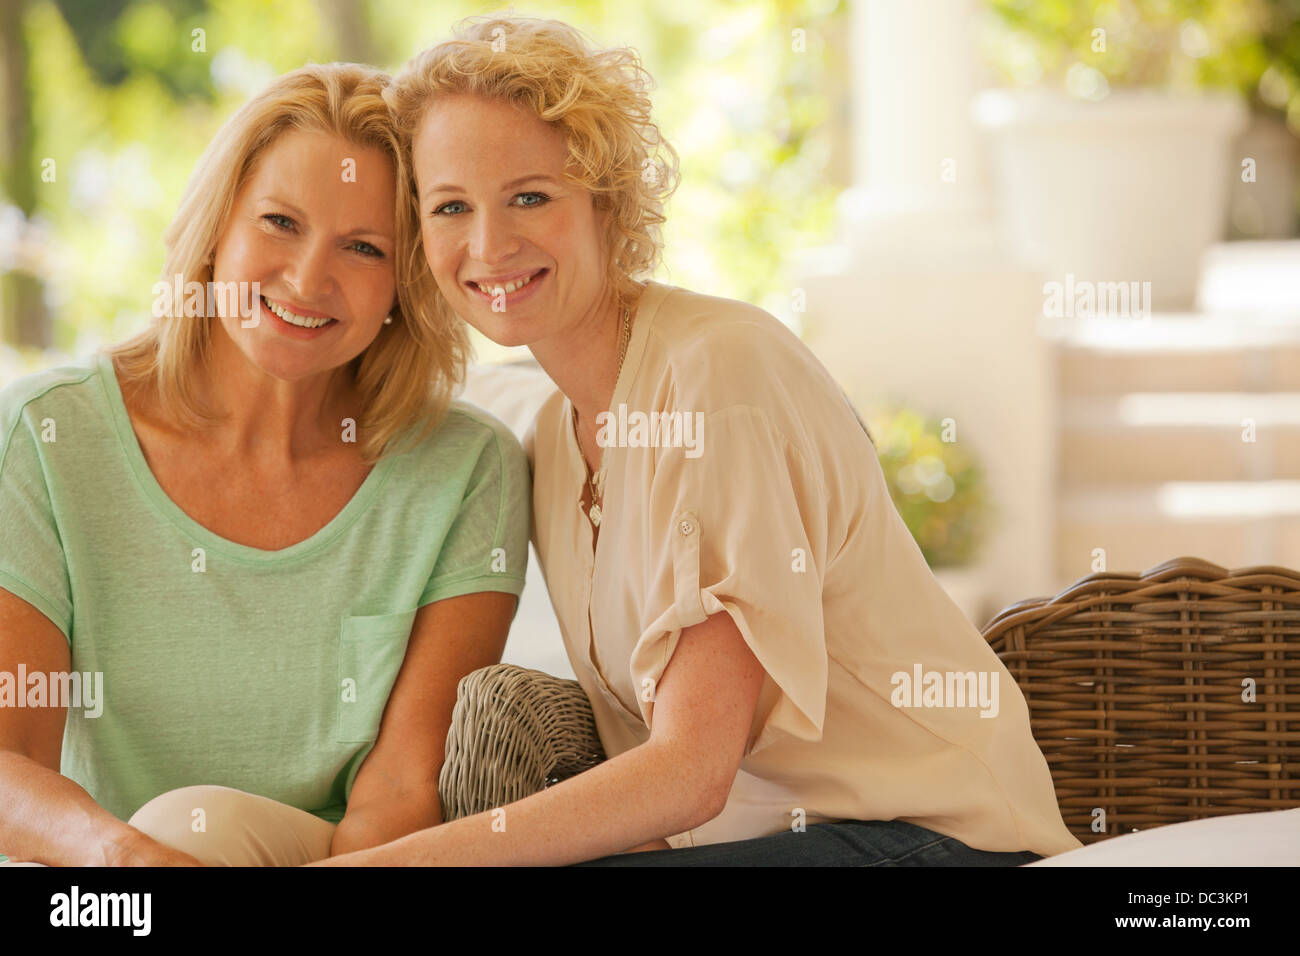 Portrait of smiling mother and daughter on patio Banque D'Images